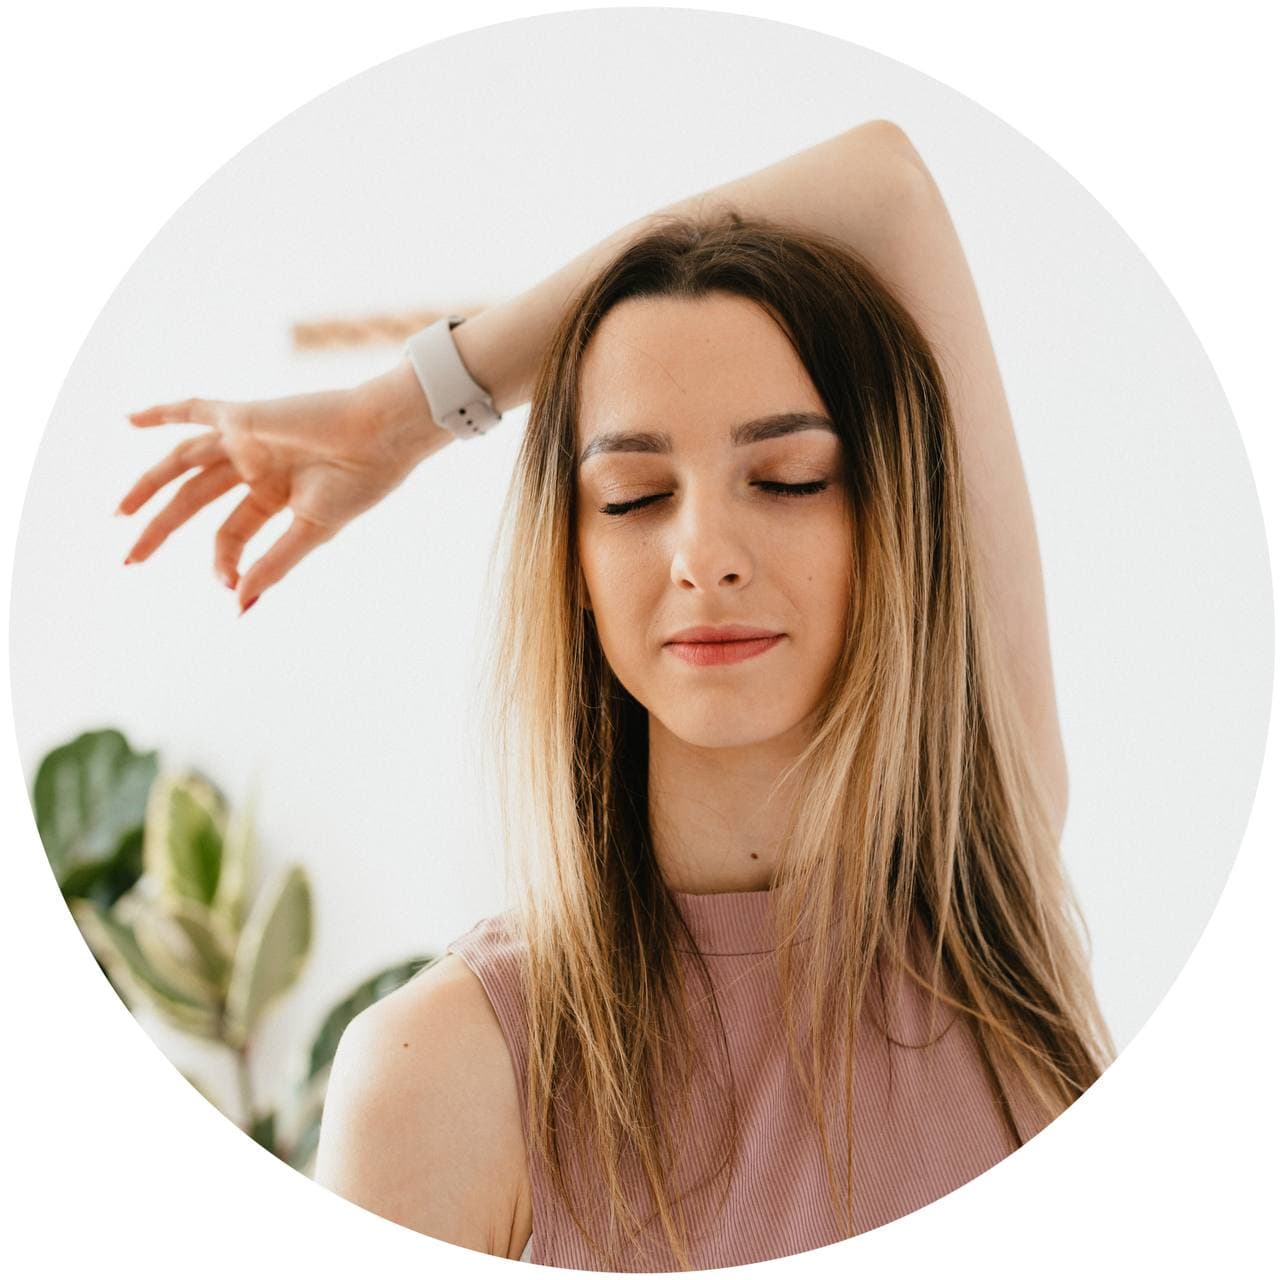 Girl meditating with her eyes closed and one hand behind her head